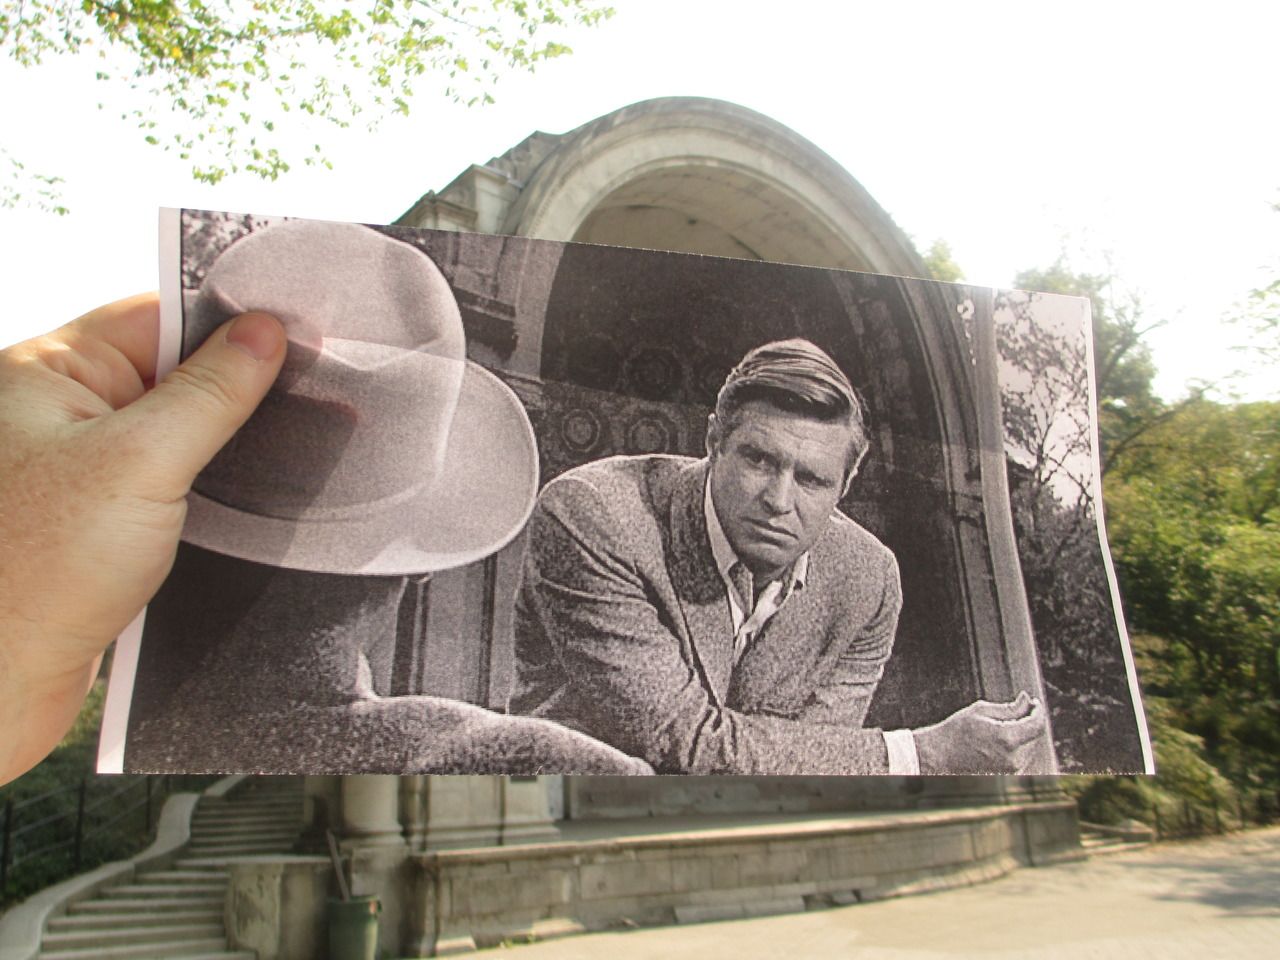 We couldn't resist including this shot of a giant George Peppard at the Naumburg Bandshell. Constructed in 1862, it's located in Central Park, just south of the Bethesda Terrace near 72nd Street.